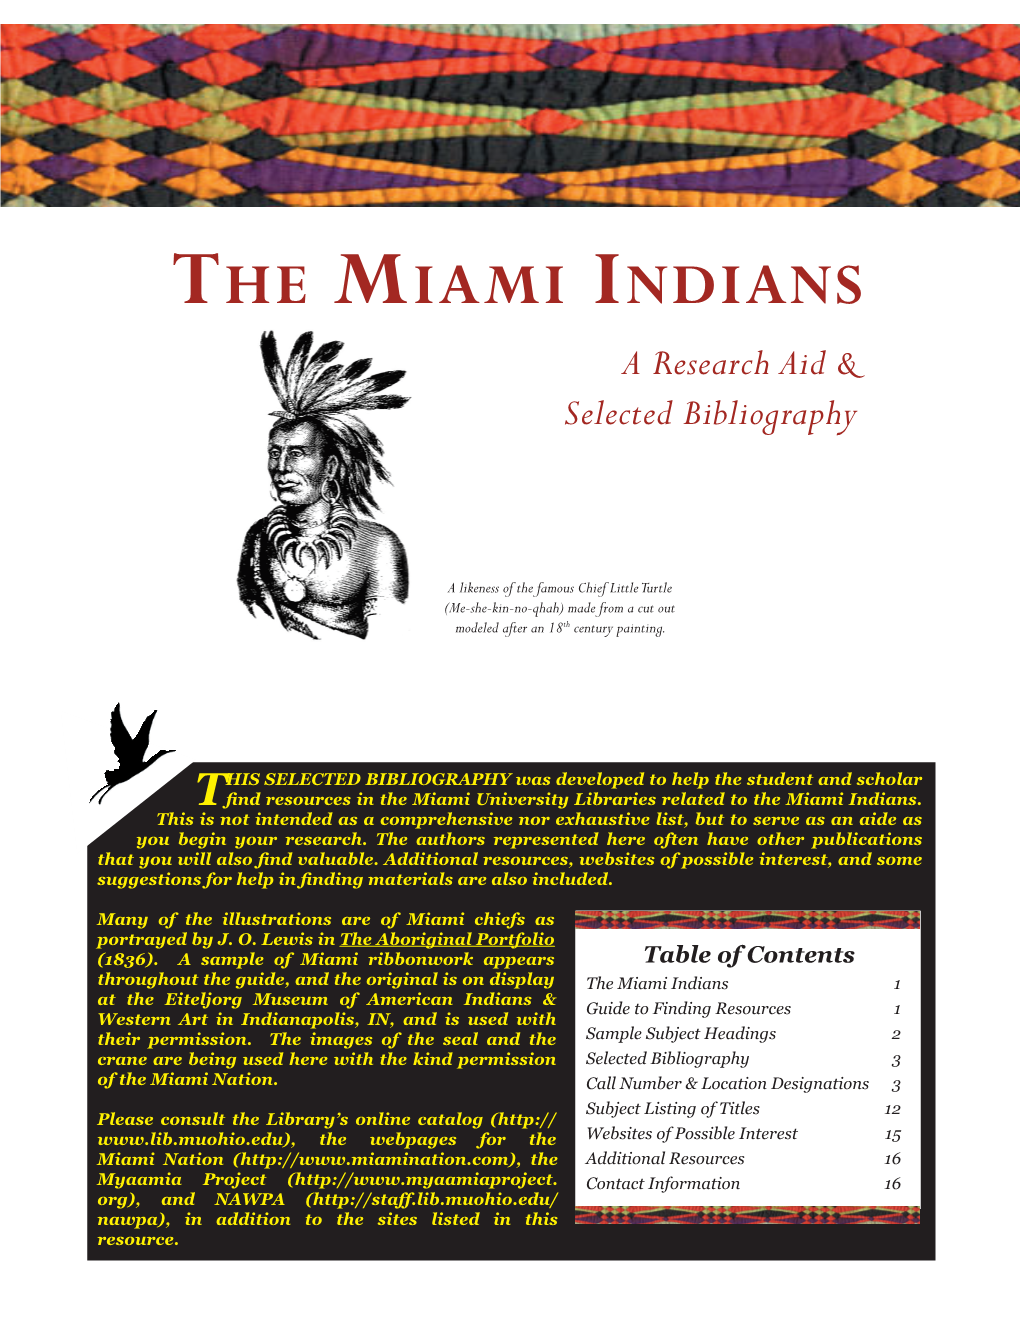 THE MIAMI INDIANS a Research Aid & Selected Bibliography